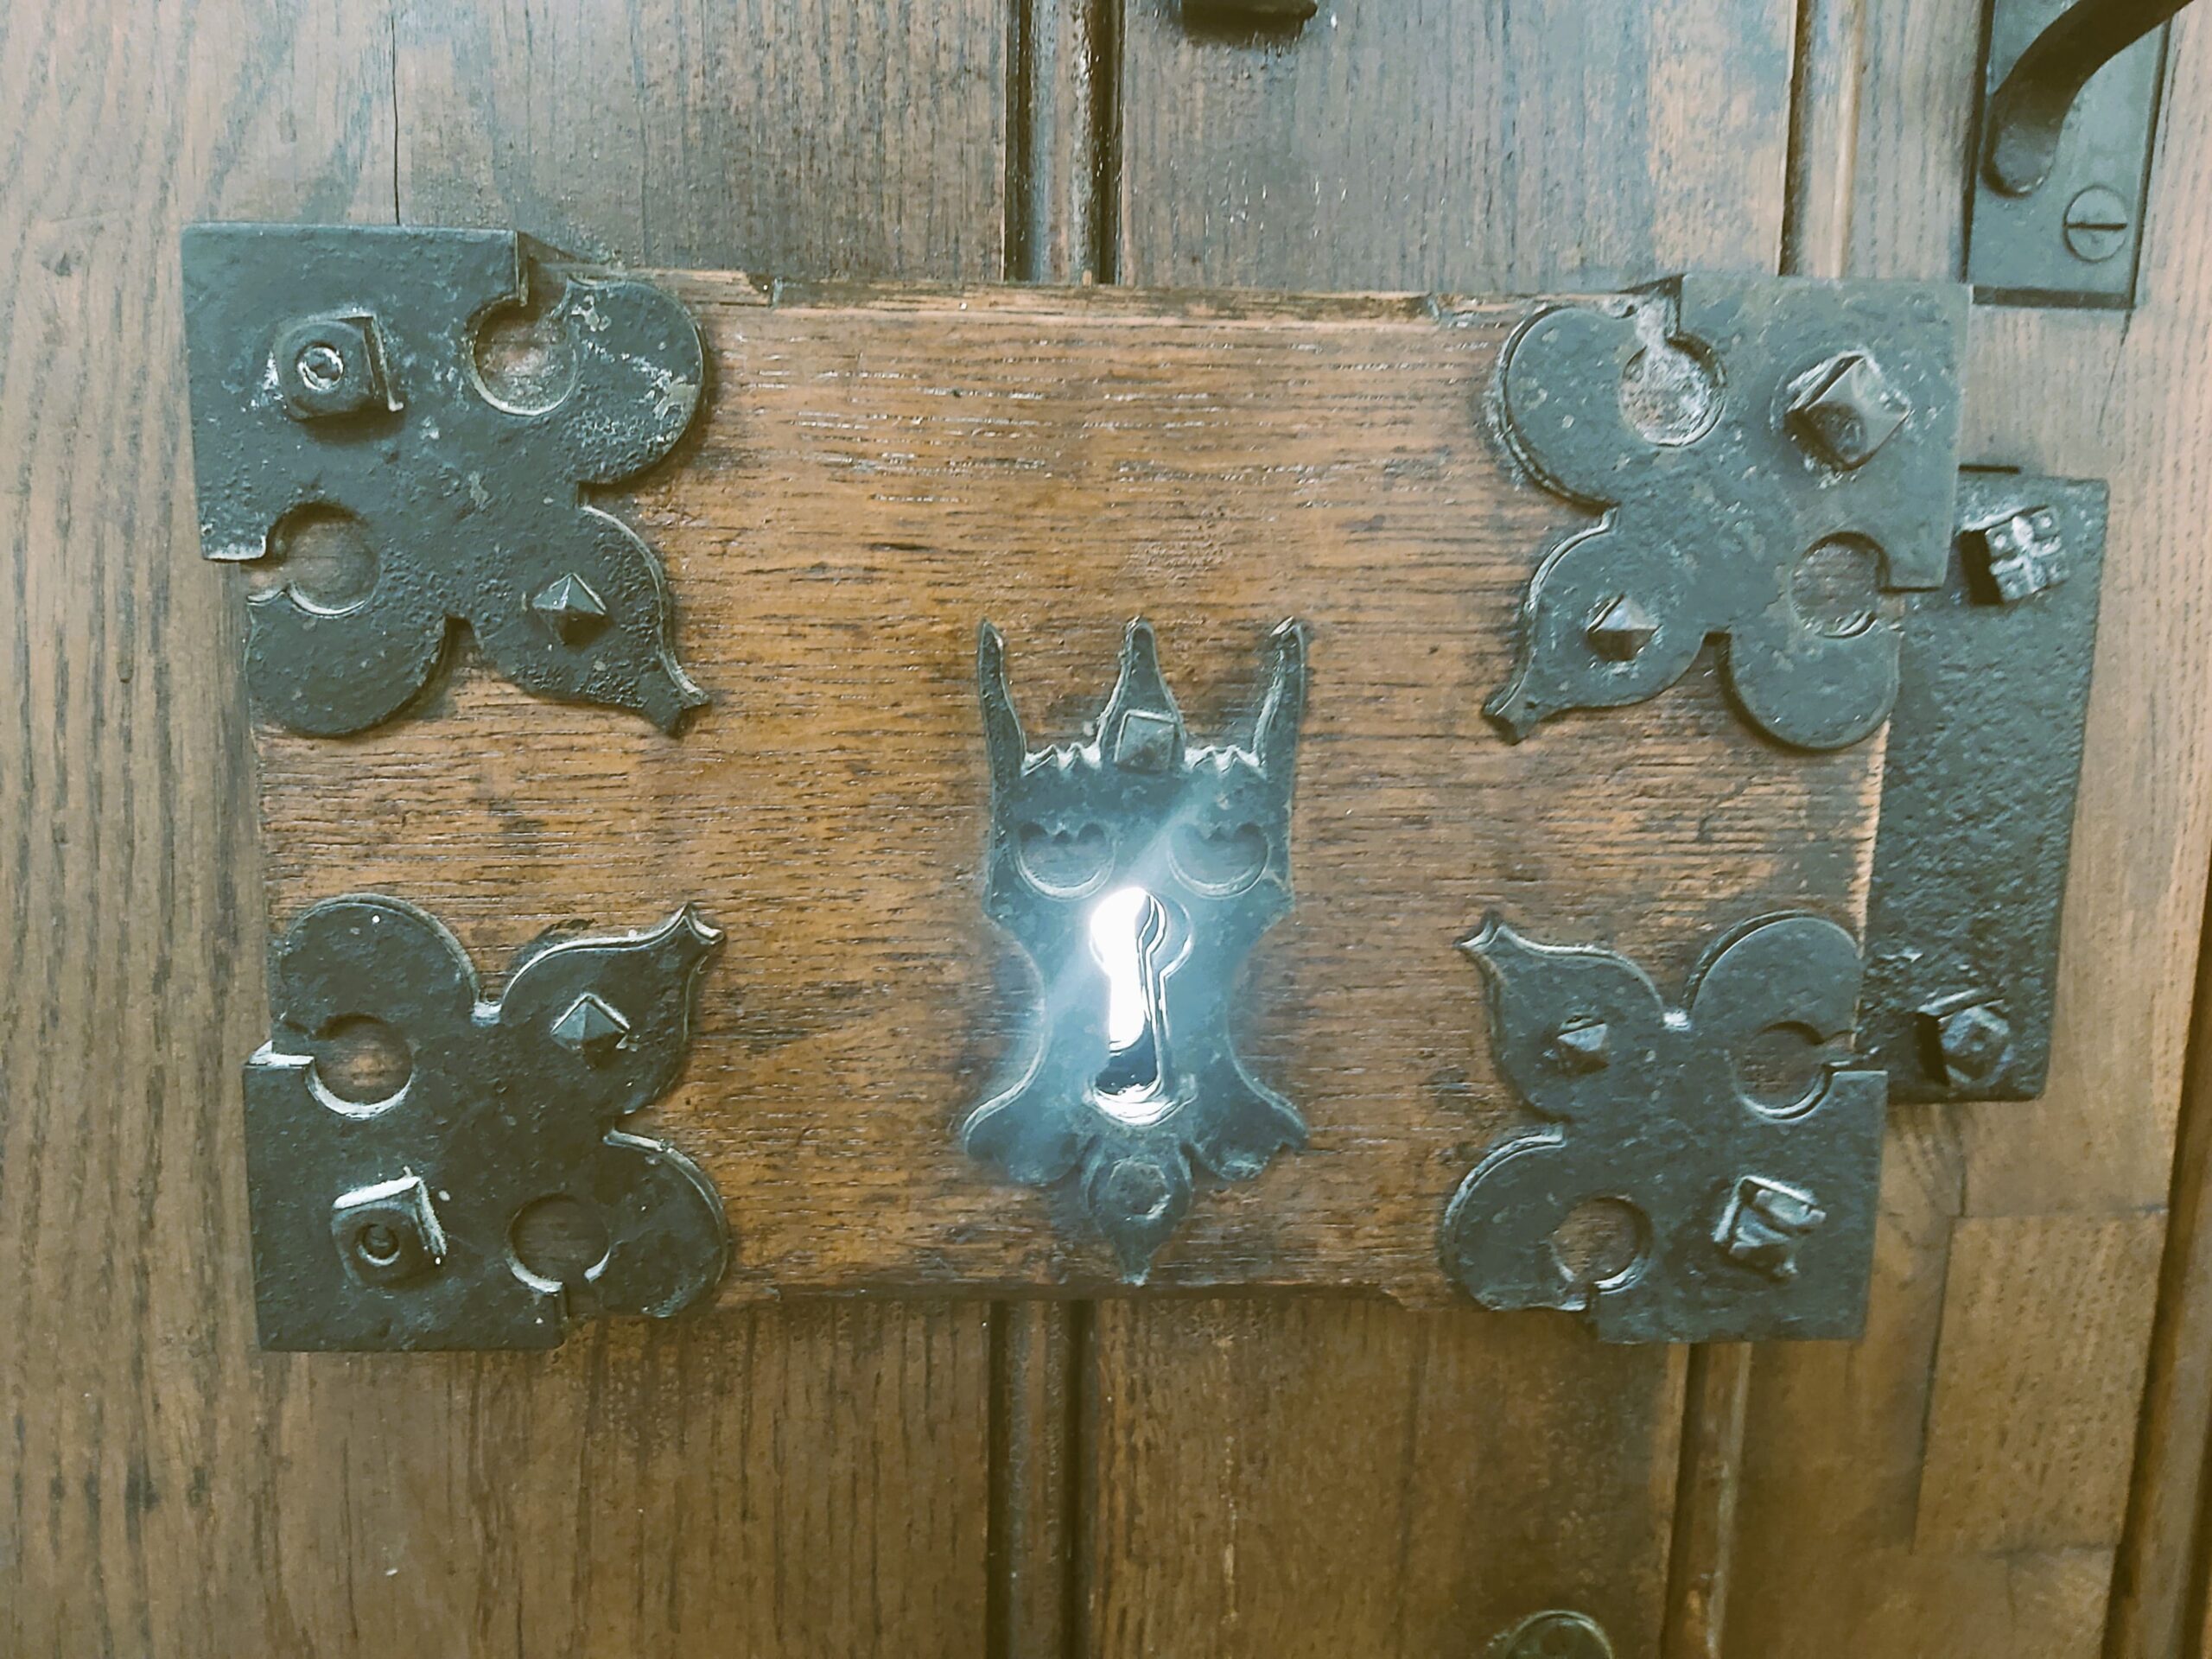 An old door lock in St Mary's Church, Ware, England